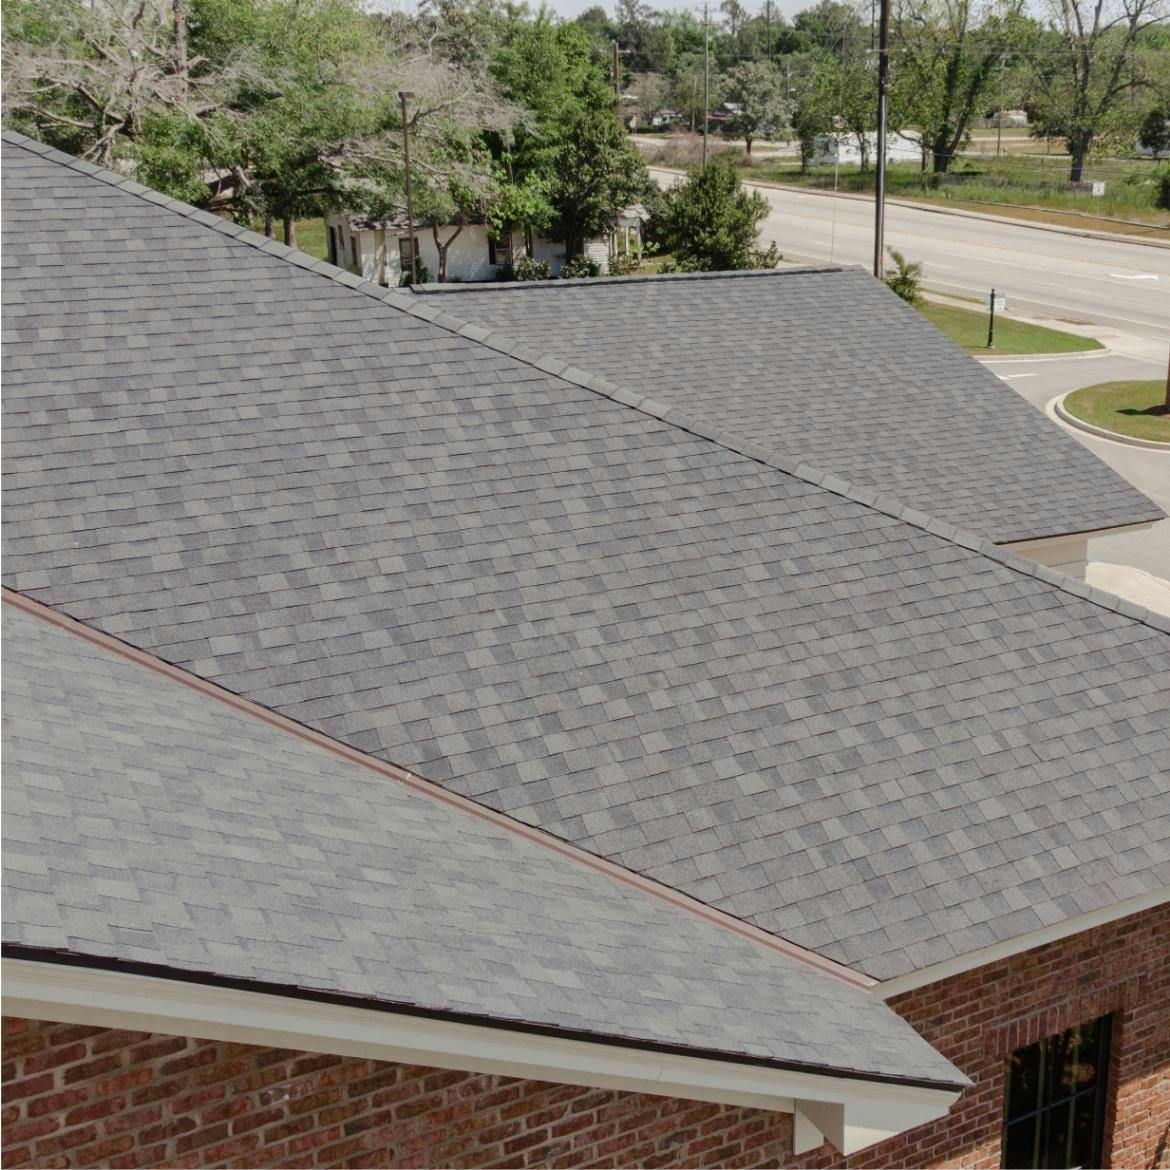 Durden Bank Millen, Georgia | Jenkins County Commercial Roofing | Commercial Roof Replacement | Architectural Asphalt Shingles